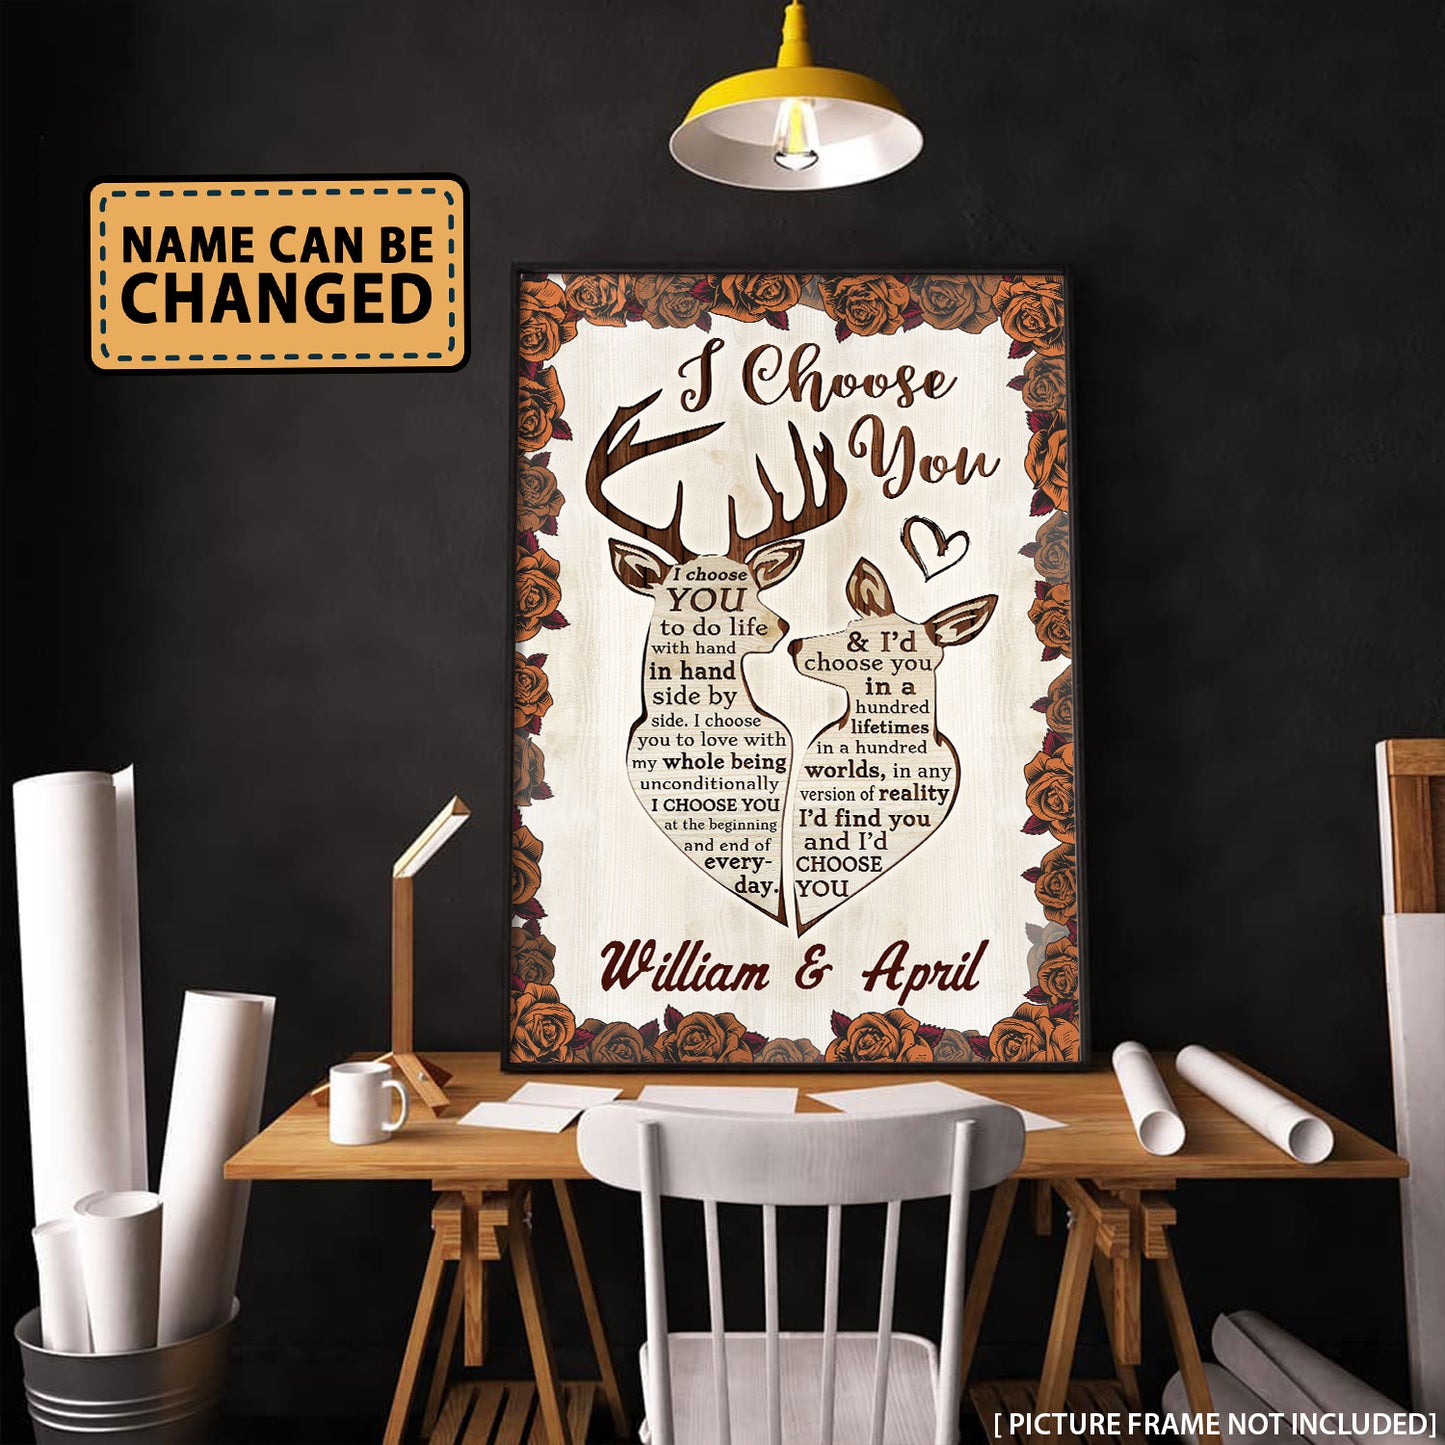 I Choose You Deer Gold Rose Couple Anniversary Personalized Poster